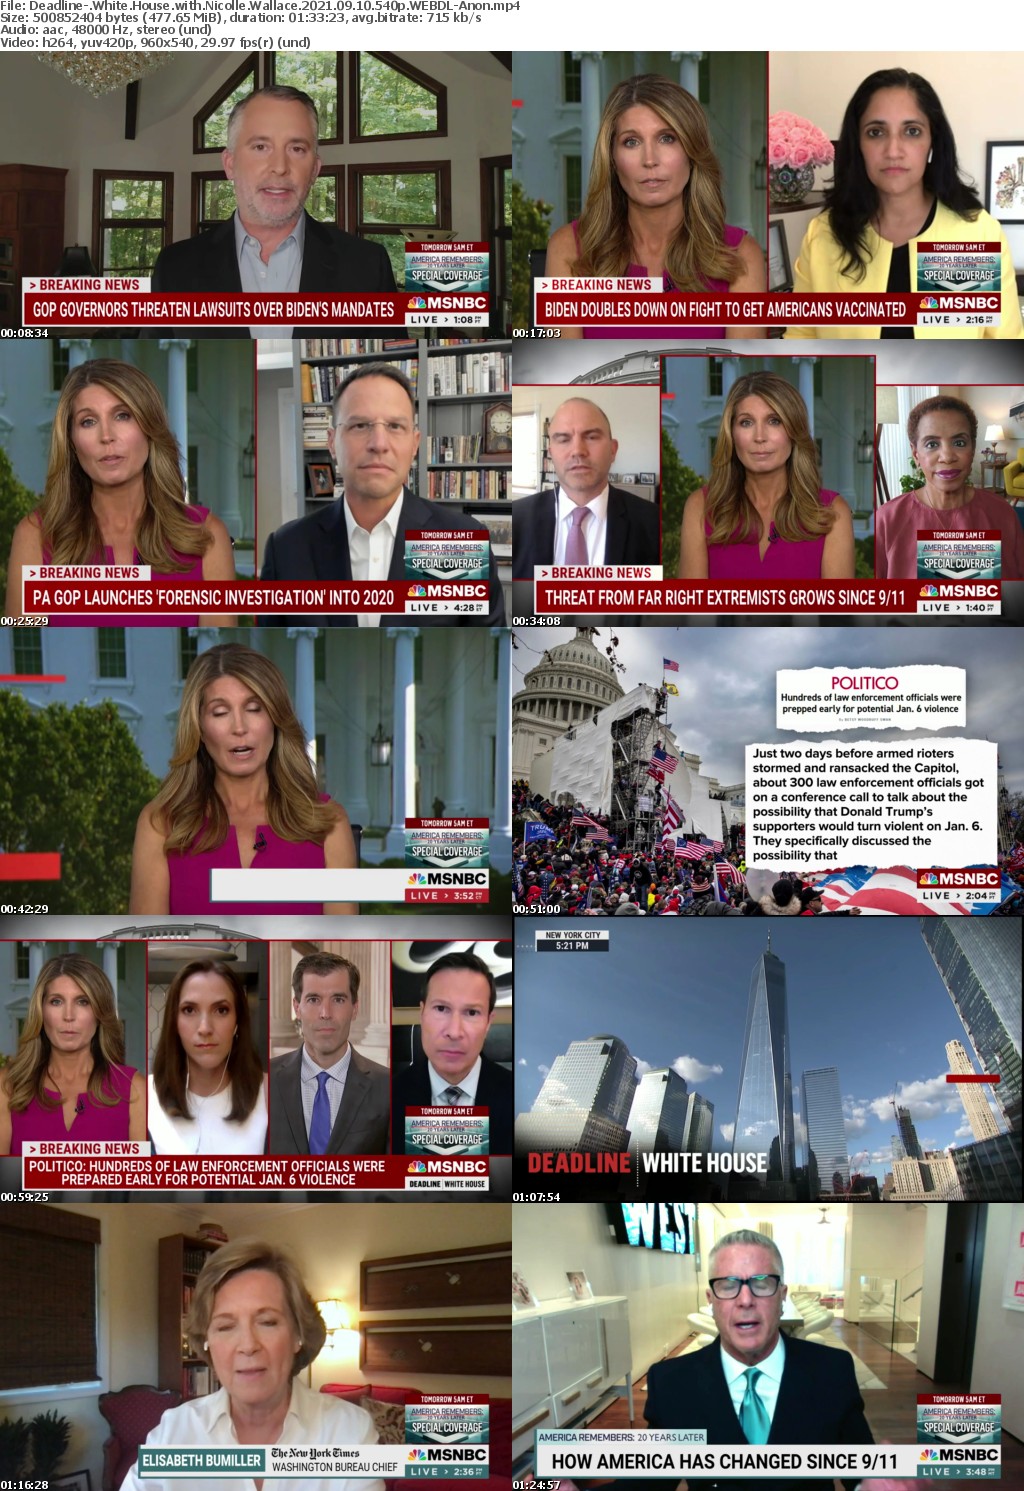 Deadline- White House with Nicolle Wallace 2021 09 10 540p WEBDL-Anon